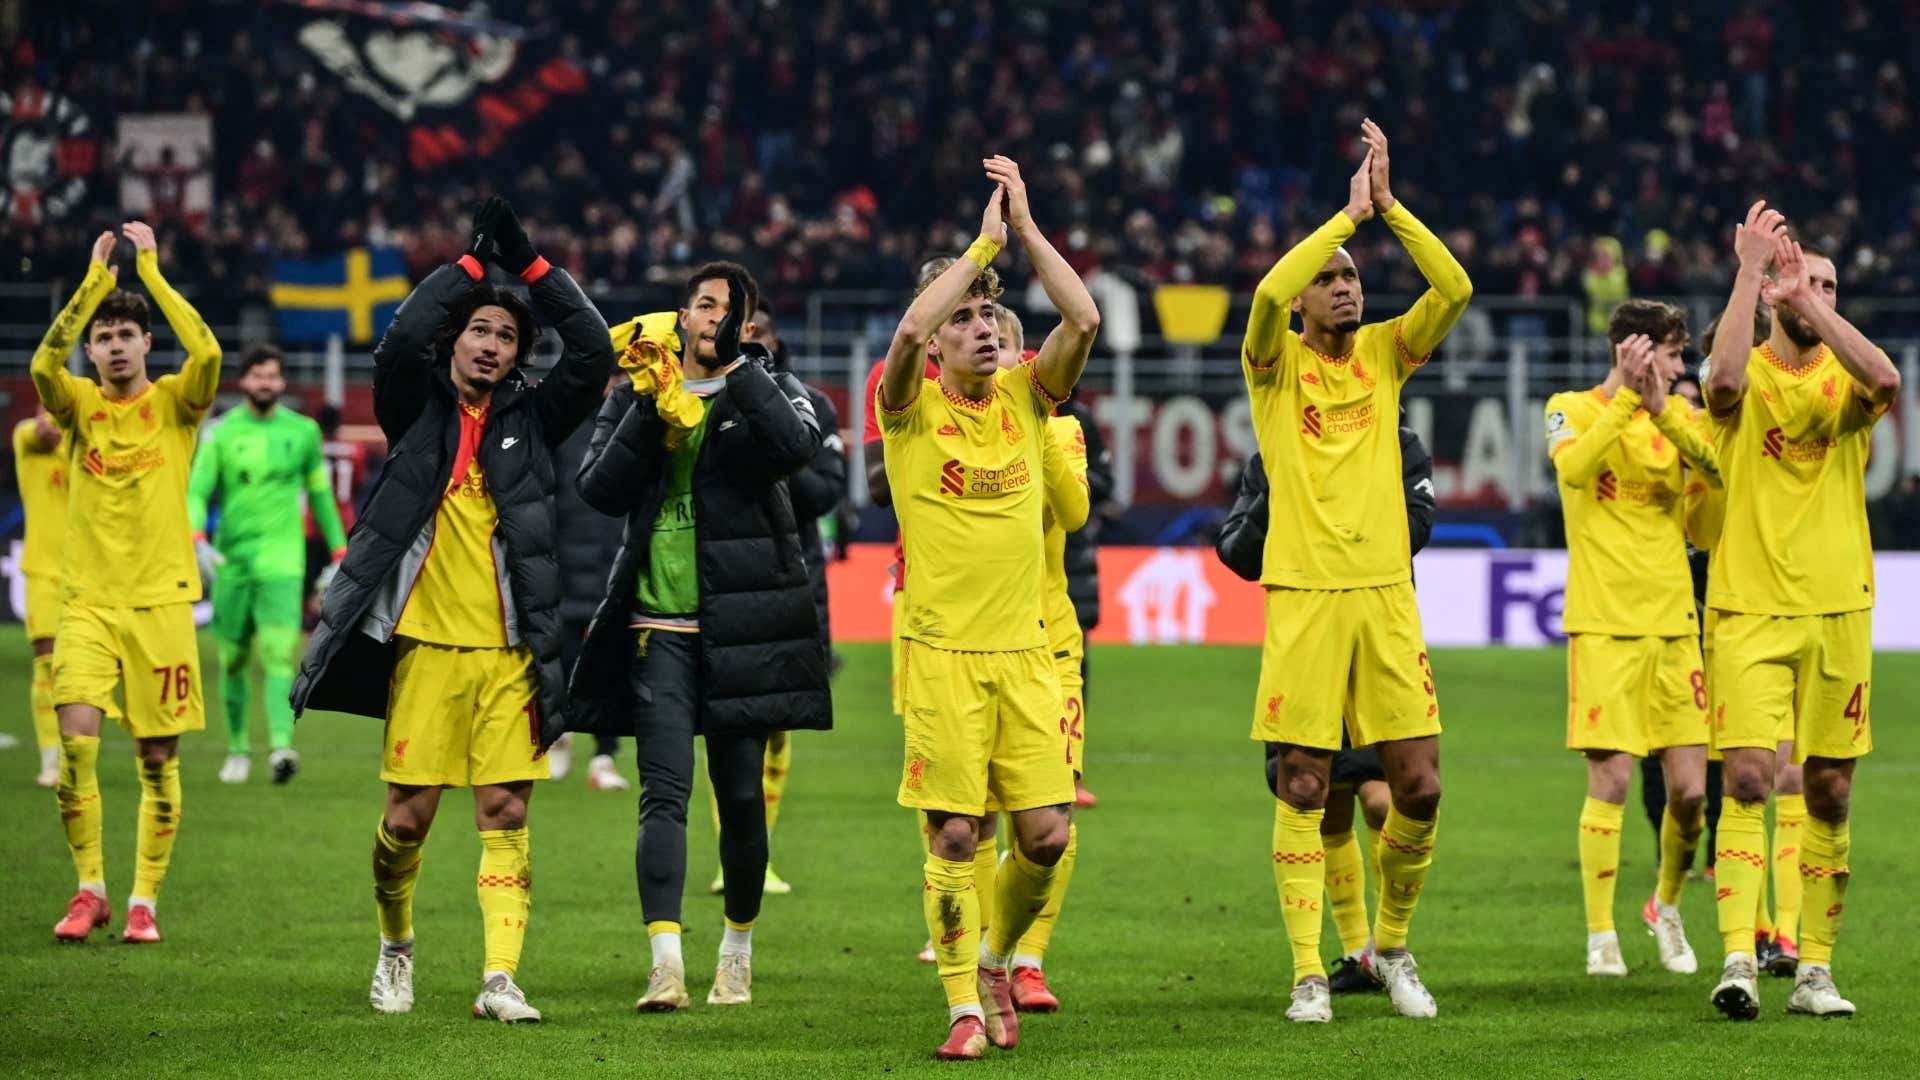 Liverpool celebrate win over AC Milan, Champions League 2021-22